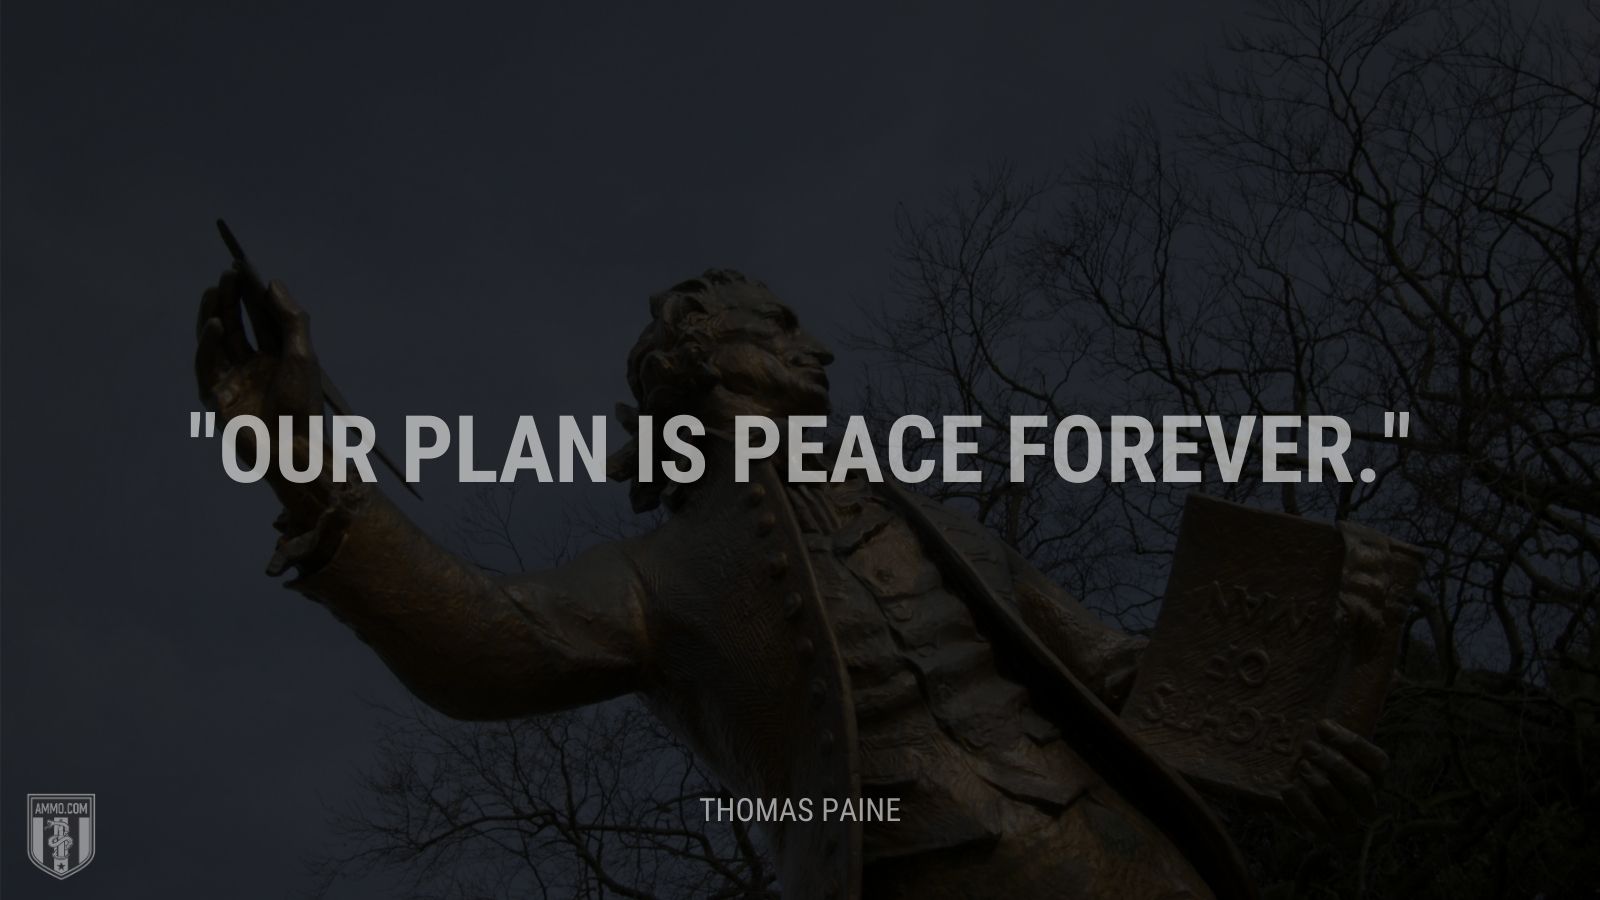 “Our plan is peace forever.” - Thomas Paine